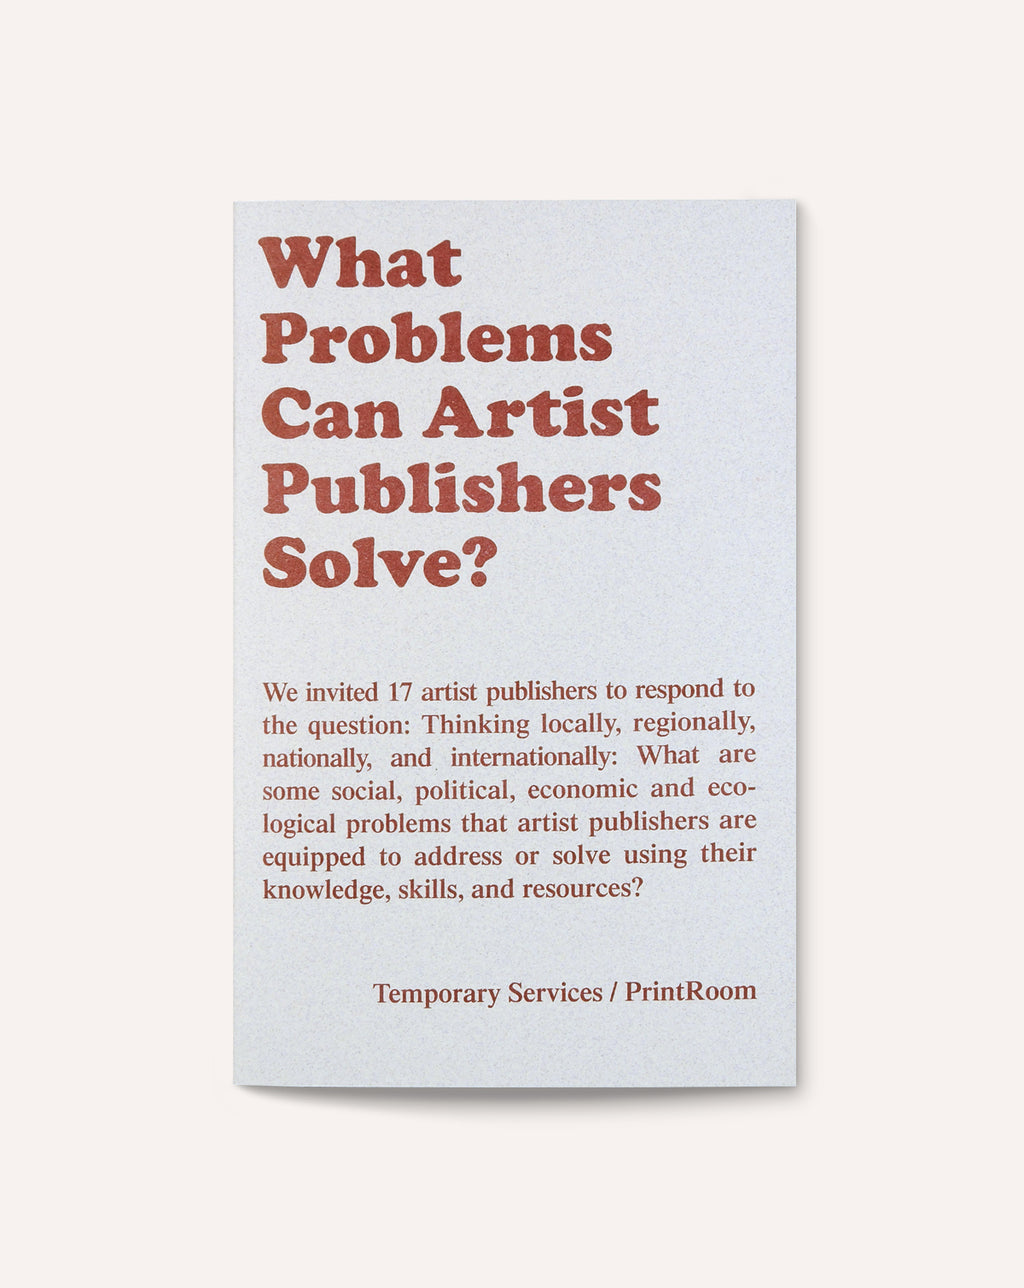 What Problems Can Artist Publishers Solve?